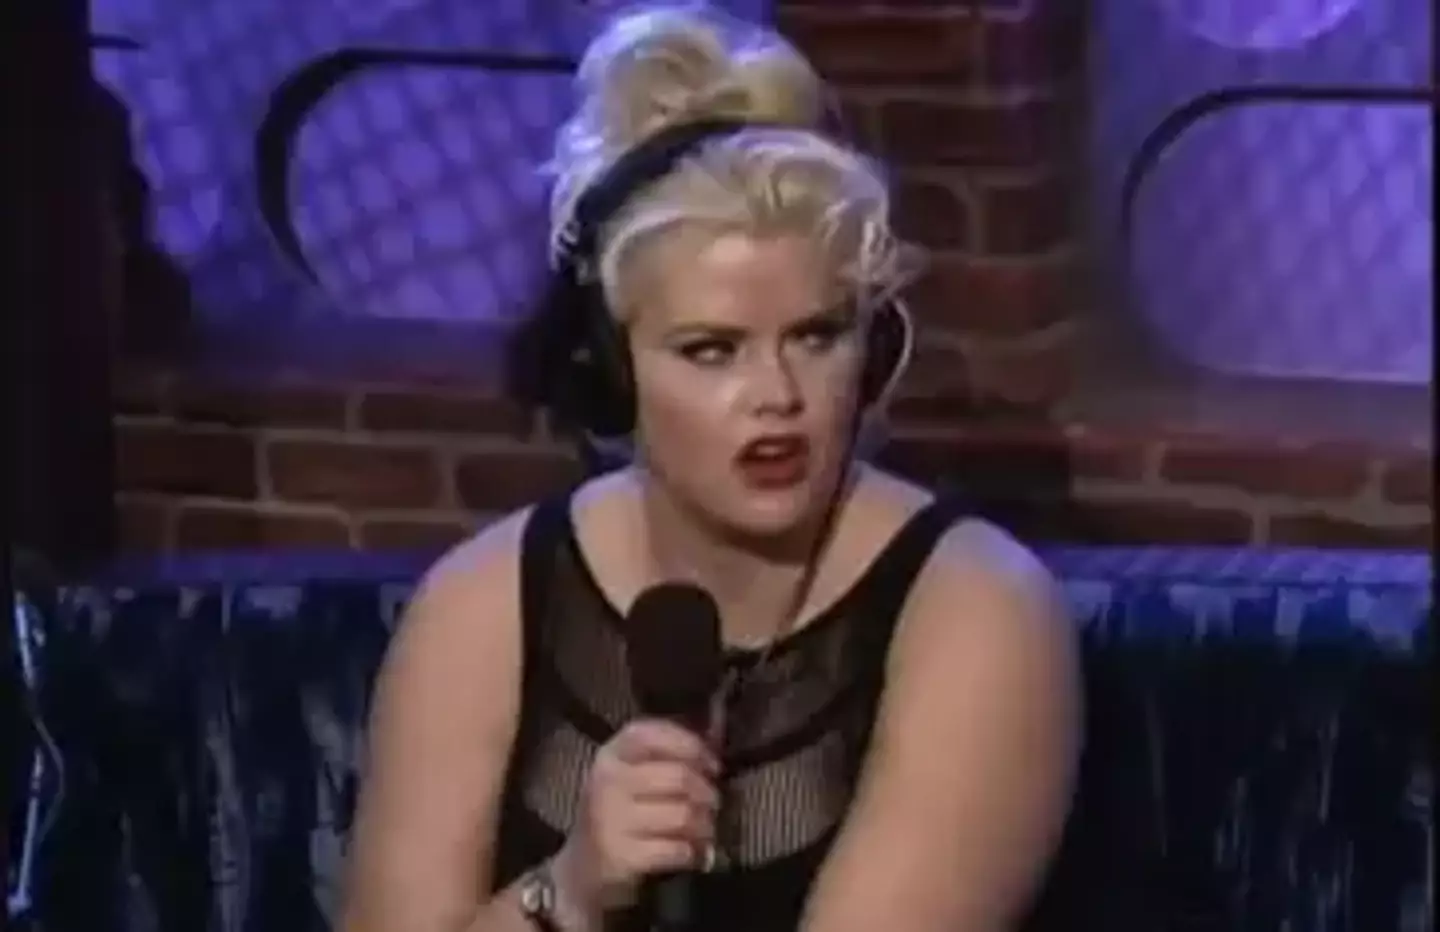 Howard Stern tried to pressure Anna Nicole Smith to weigh herself live on air.